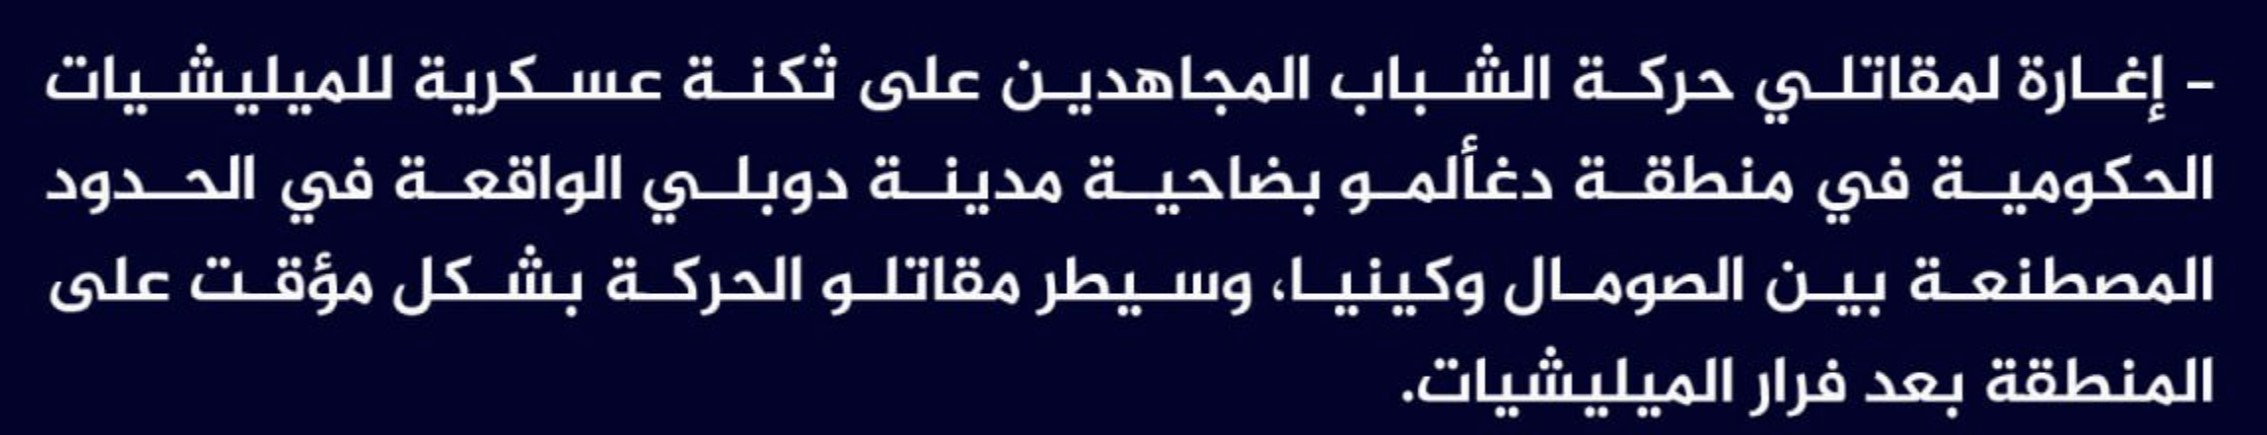 (Claim) al-Shabaab Ambushed a Somalian Military Base in Daghalmo District and Temporarily Seized Control Over the District in Dhobley City in Lower Juba, Somalia - 1 July 2023